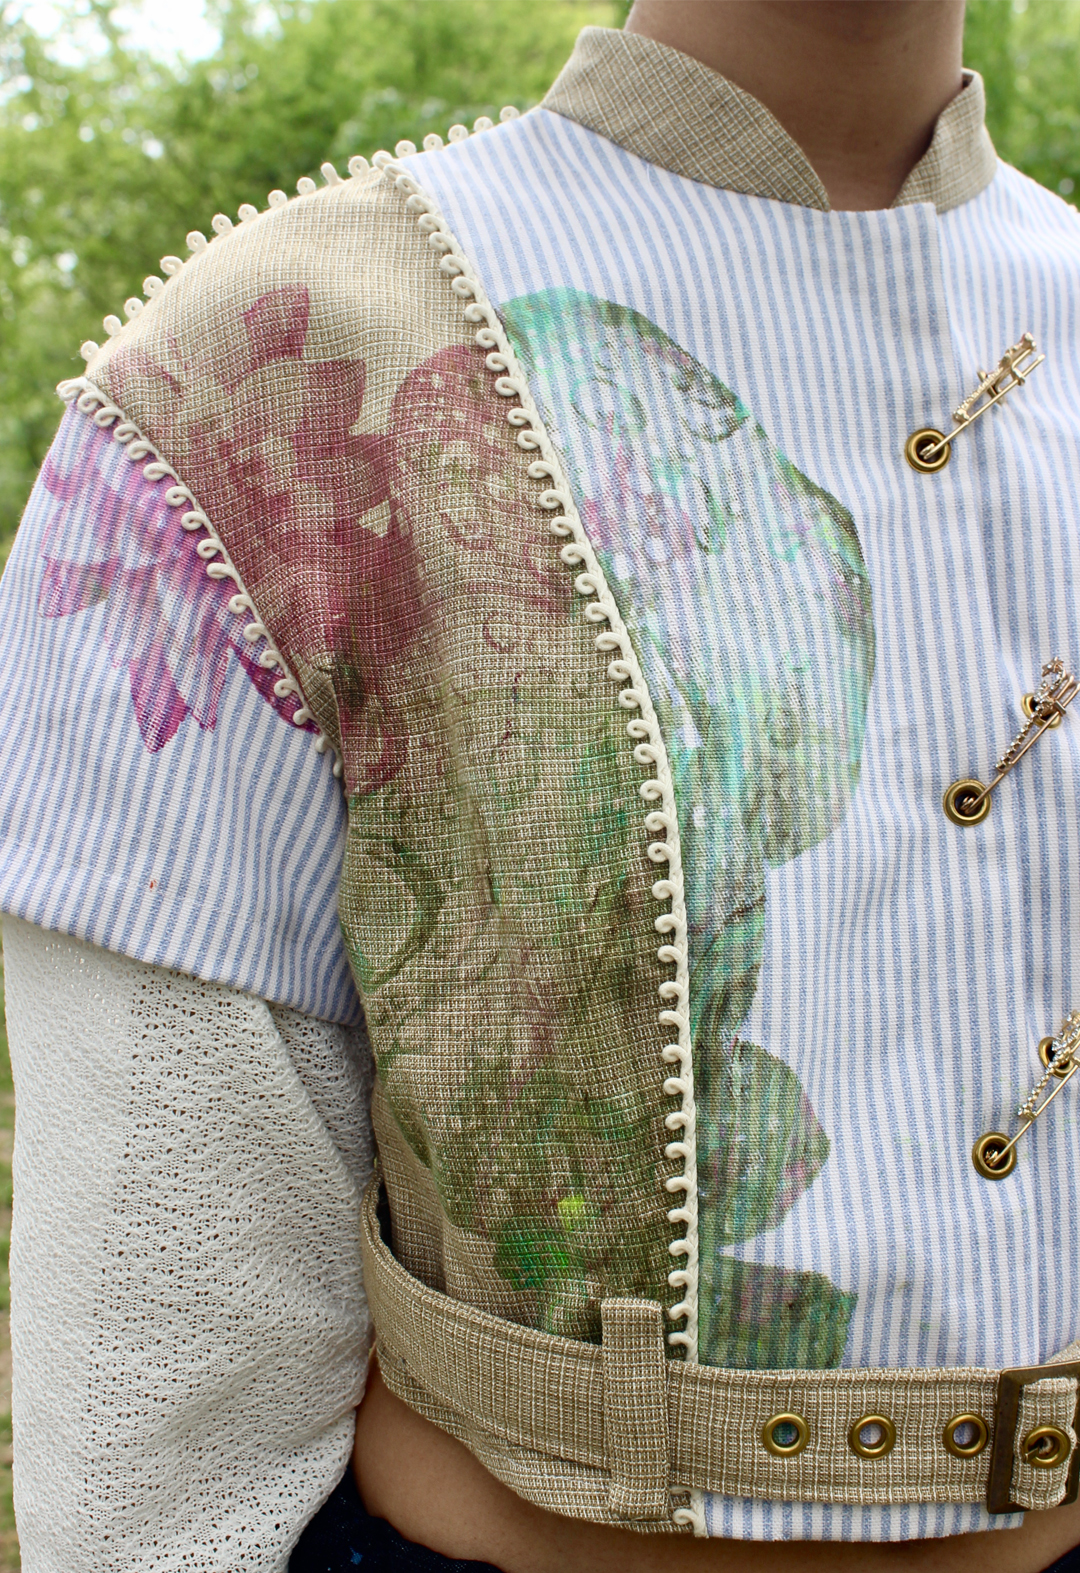 Close-up front view of button-up top, featuring lotus flower screen print, piping with loop shapes, and three gem-detailed safety pins across the front.